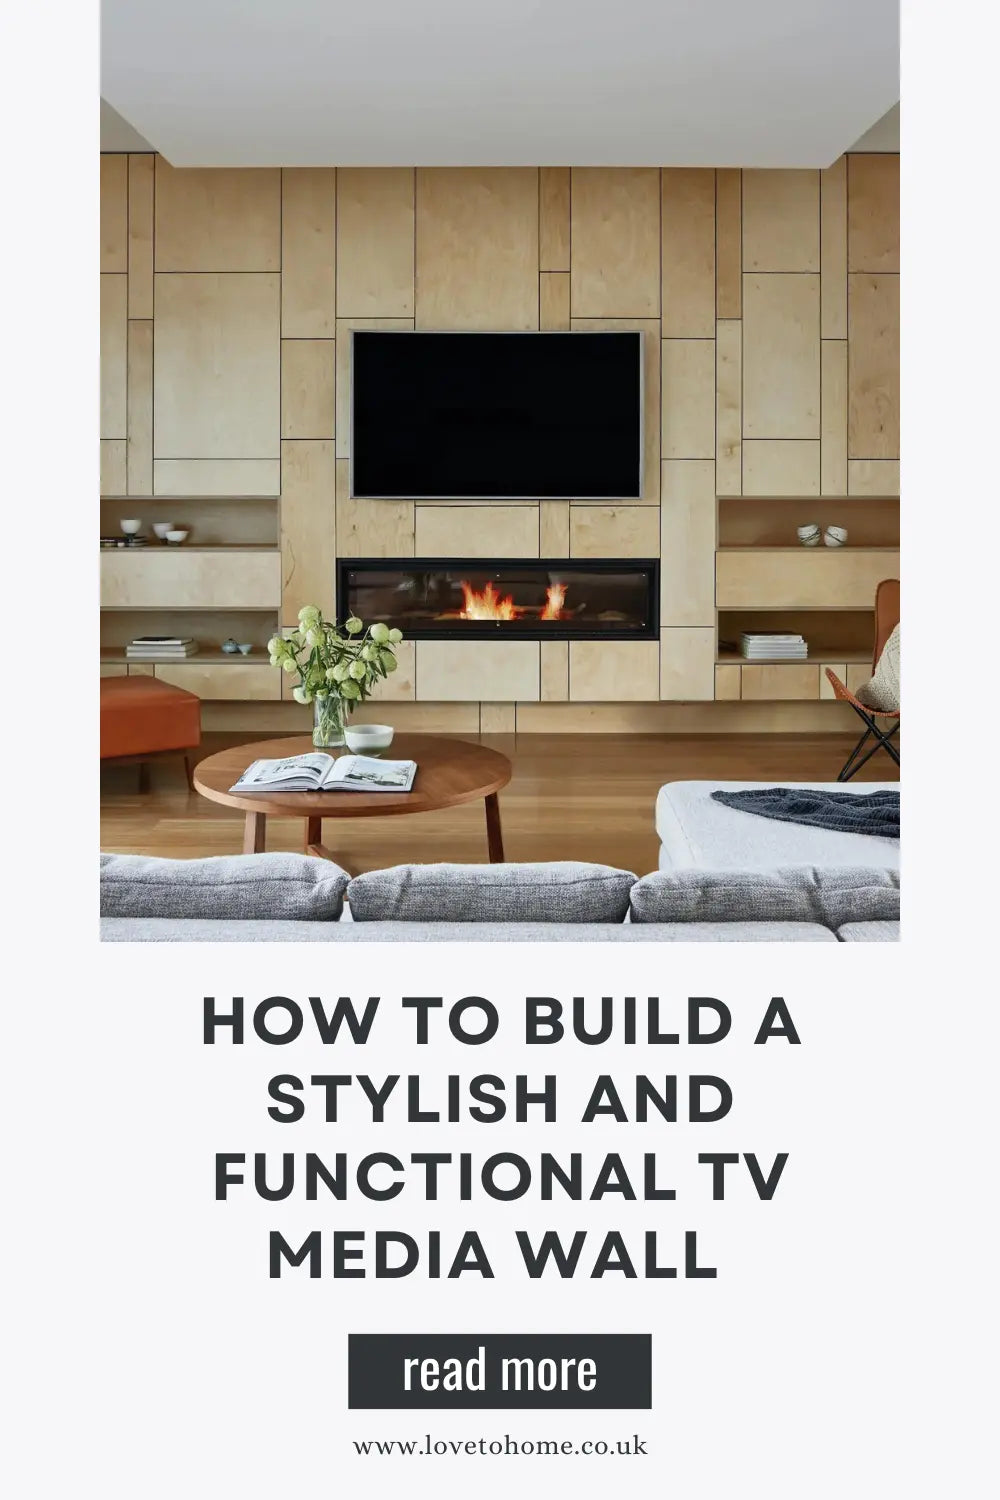 How to Build a Stylish And Functional TV Media Wall